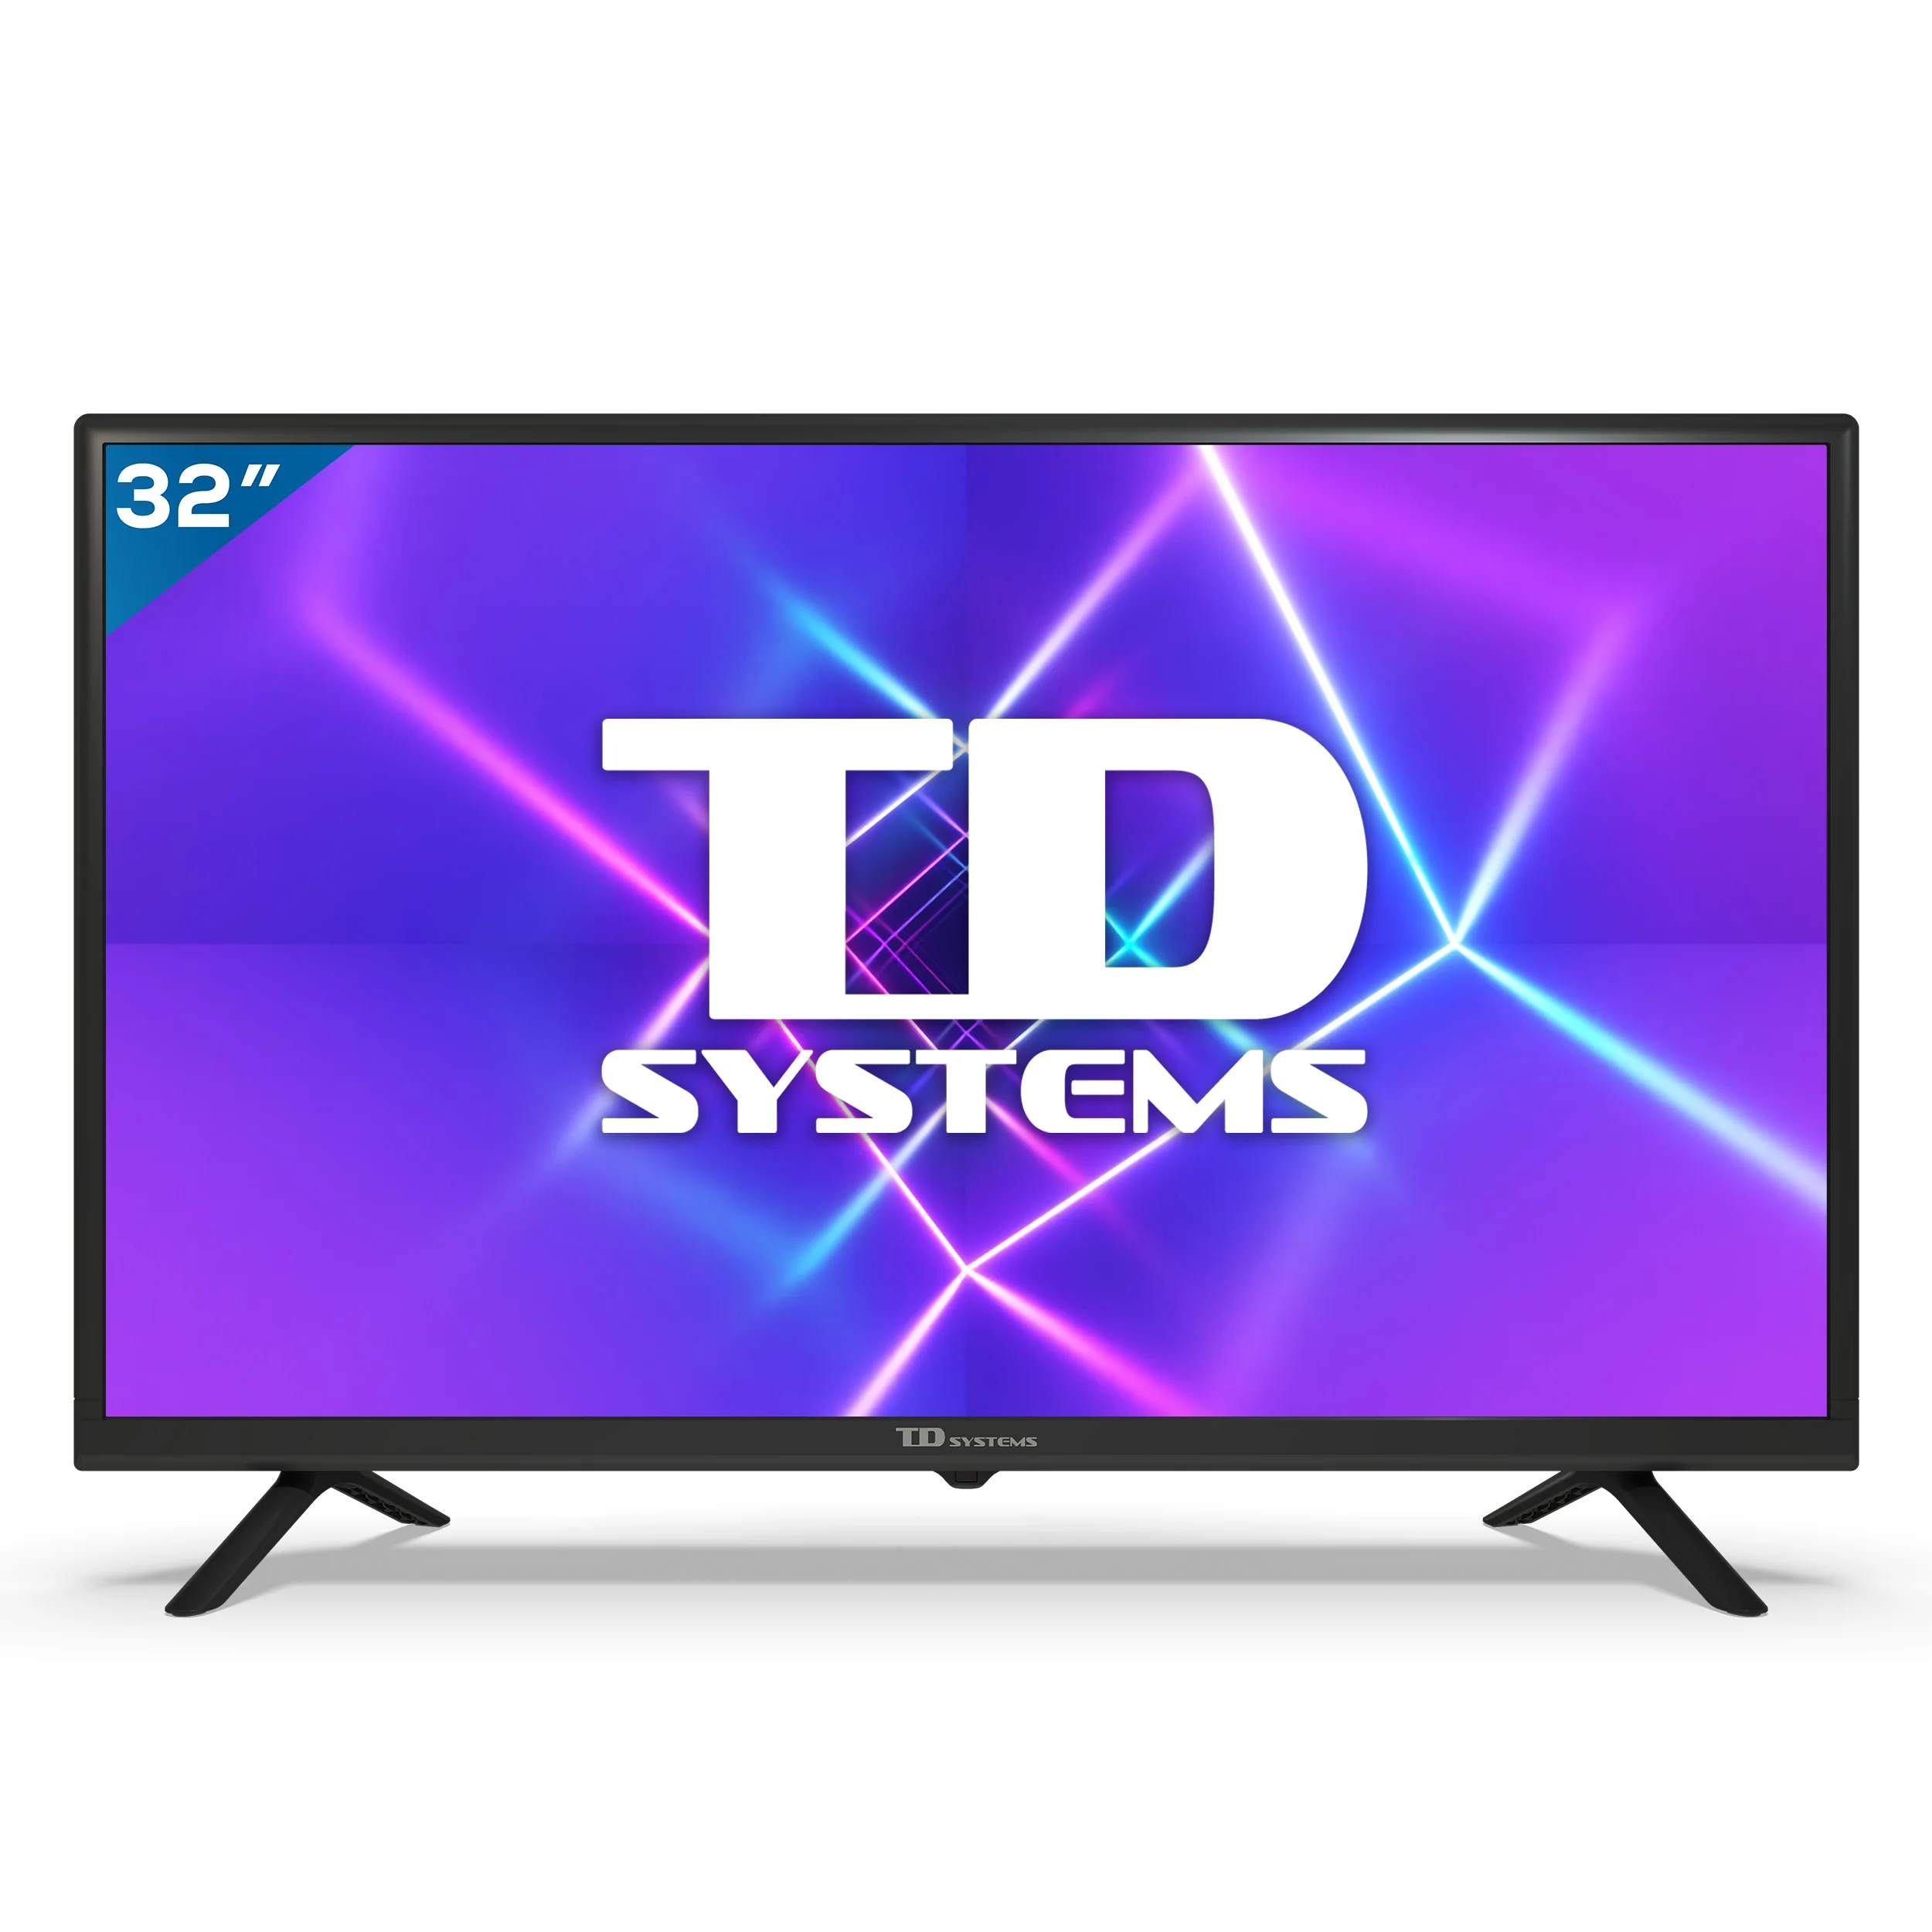 Televisions 32 inch TD Systems K32DLC16H. 2x HDMI, USB recorder,  DVB-T2/C/S2 [shipping from Spain, 3 year warranty]-TV